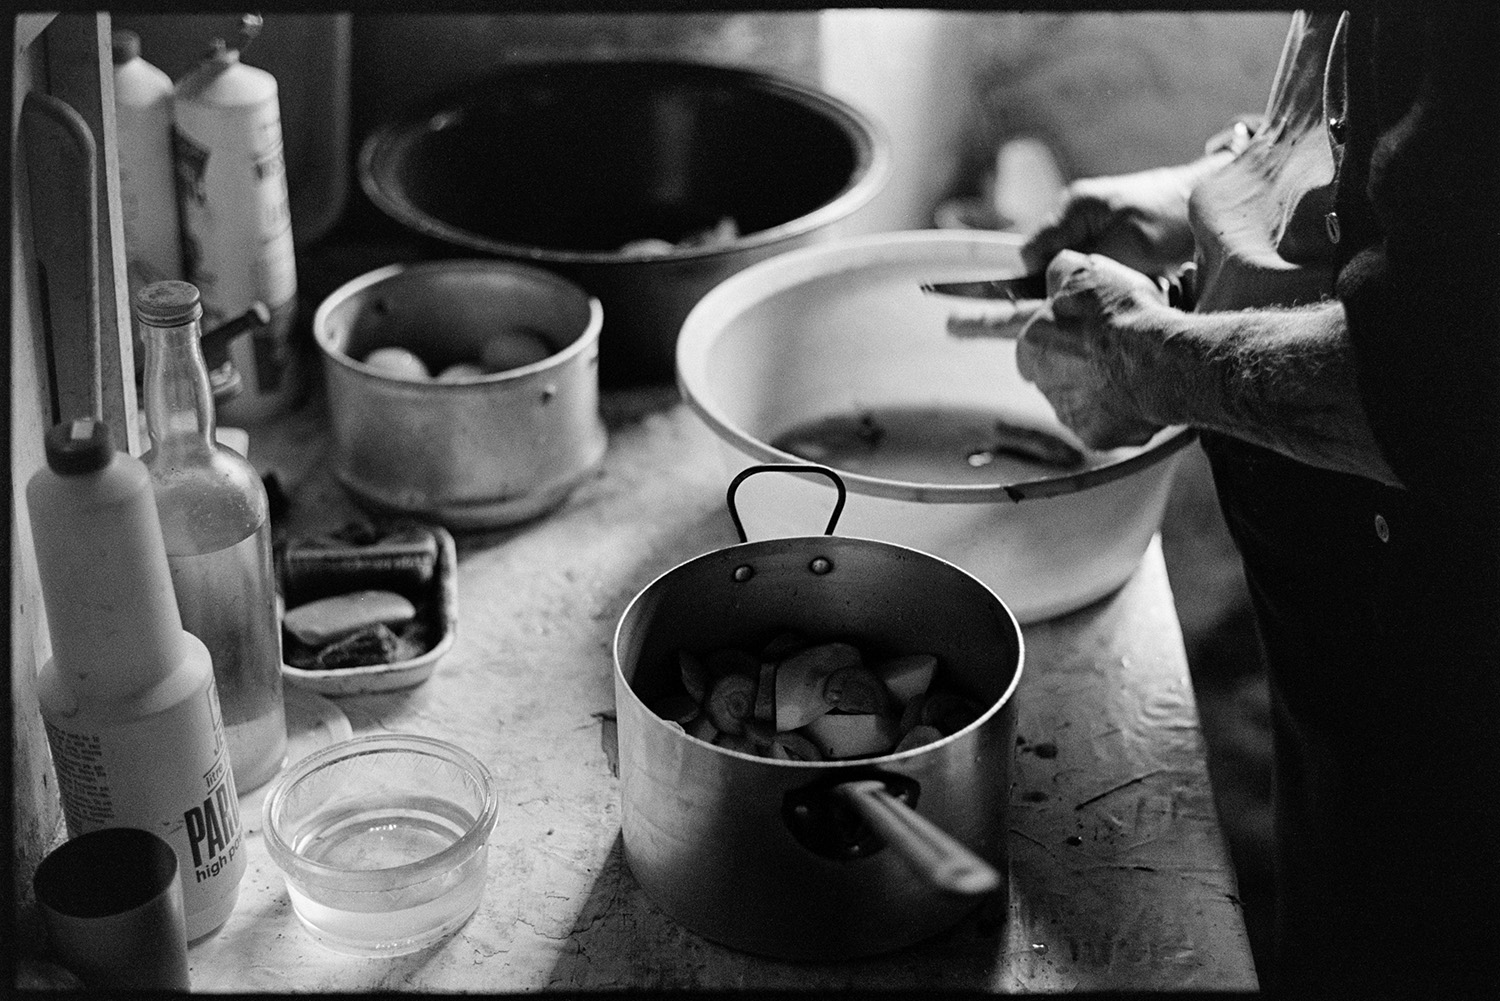 Farmer peeling potatoes and preparing meal in kitchen. Saucepans, vegetables, etc. 
[Archie Parkhouse peeling vegetables and placing them into a saucepan in his kitchen at Millhams, Dolton. Other pots and pans are visible, as well as various bottles and a bar of soap.]